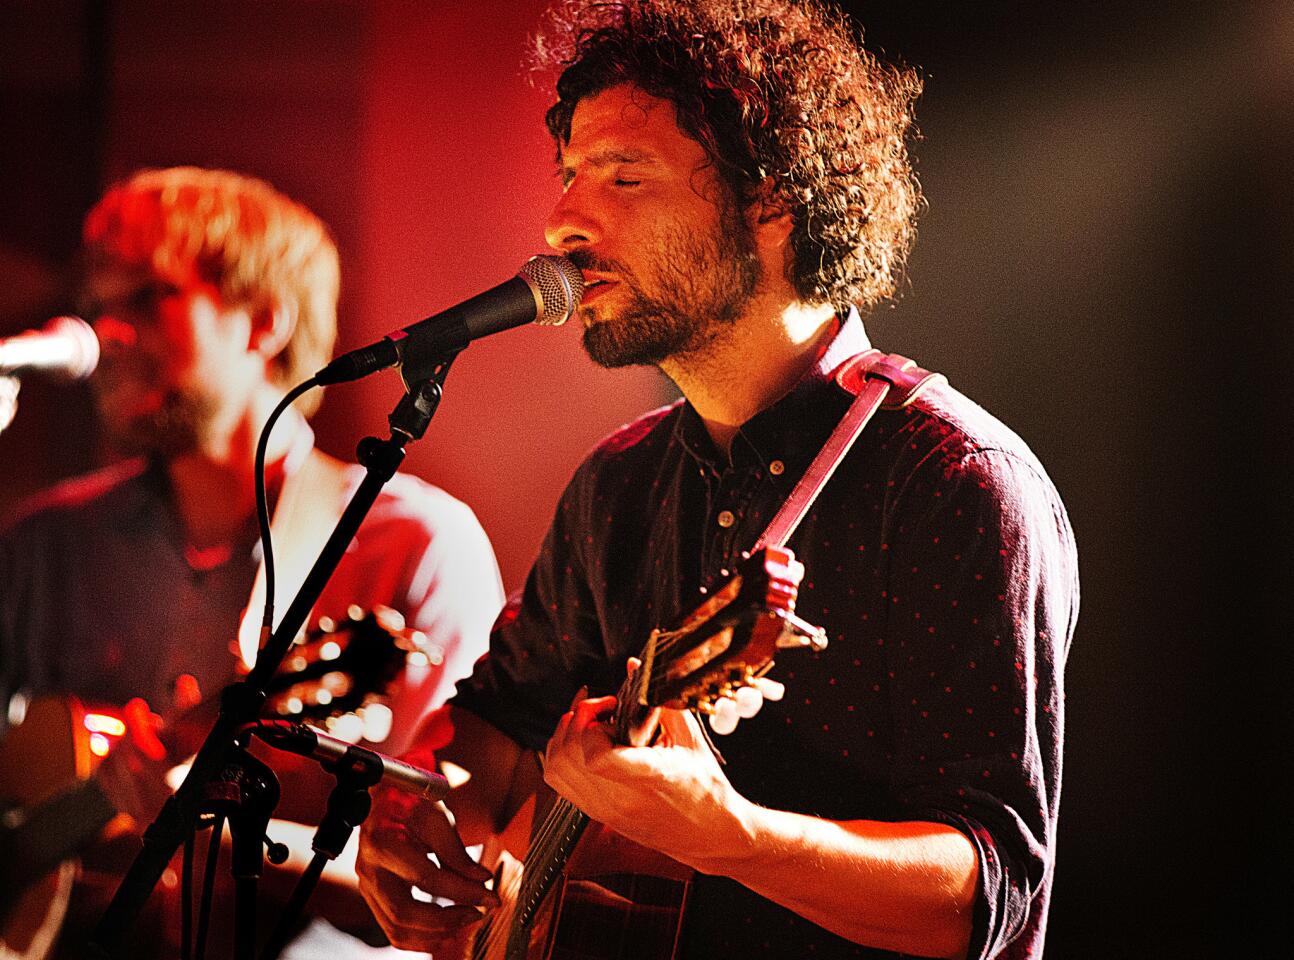 Swedish-born soft-indie-rock artist Jose Gonzalez plays the first of two sold-out shows at the Regent April 30, 2015.